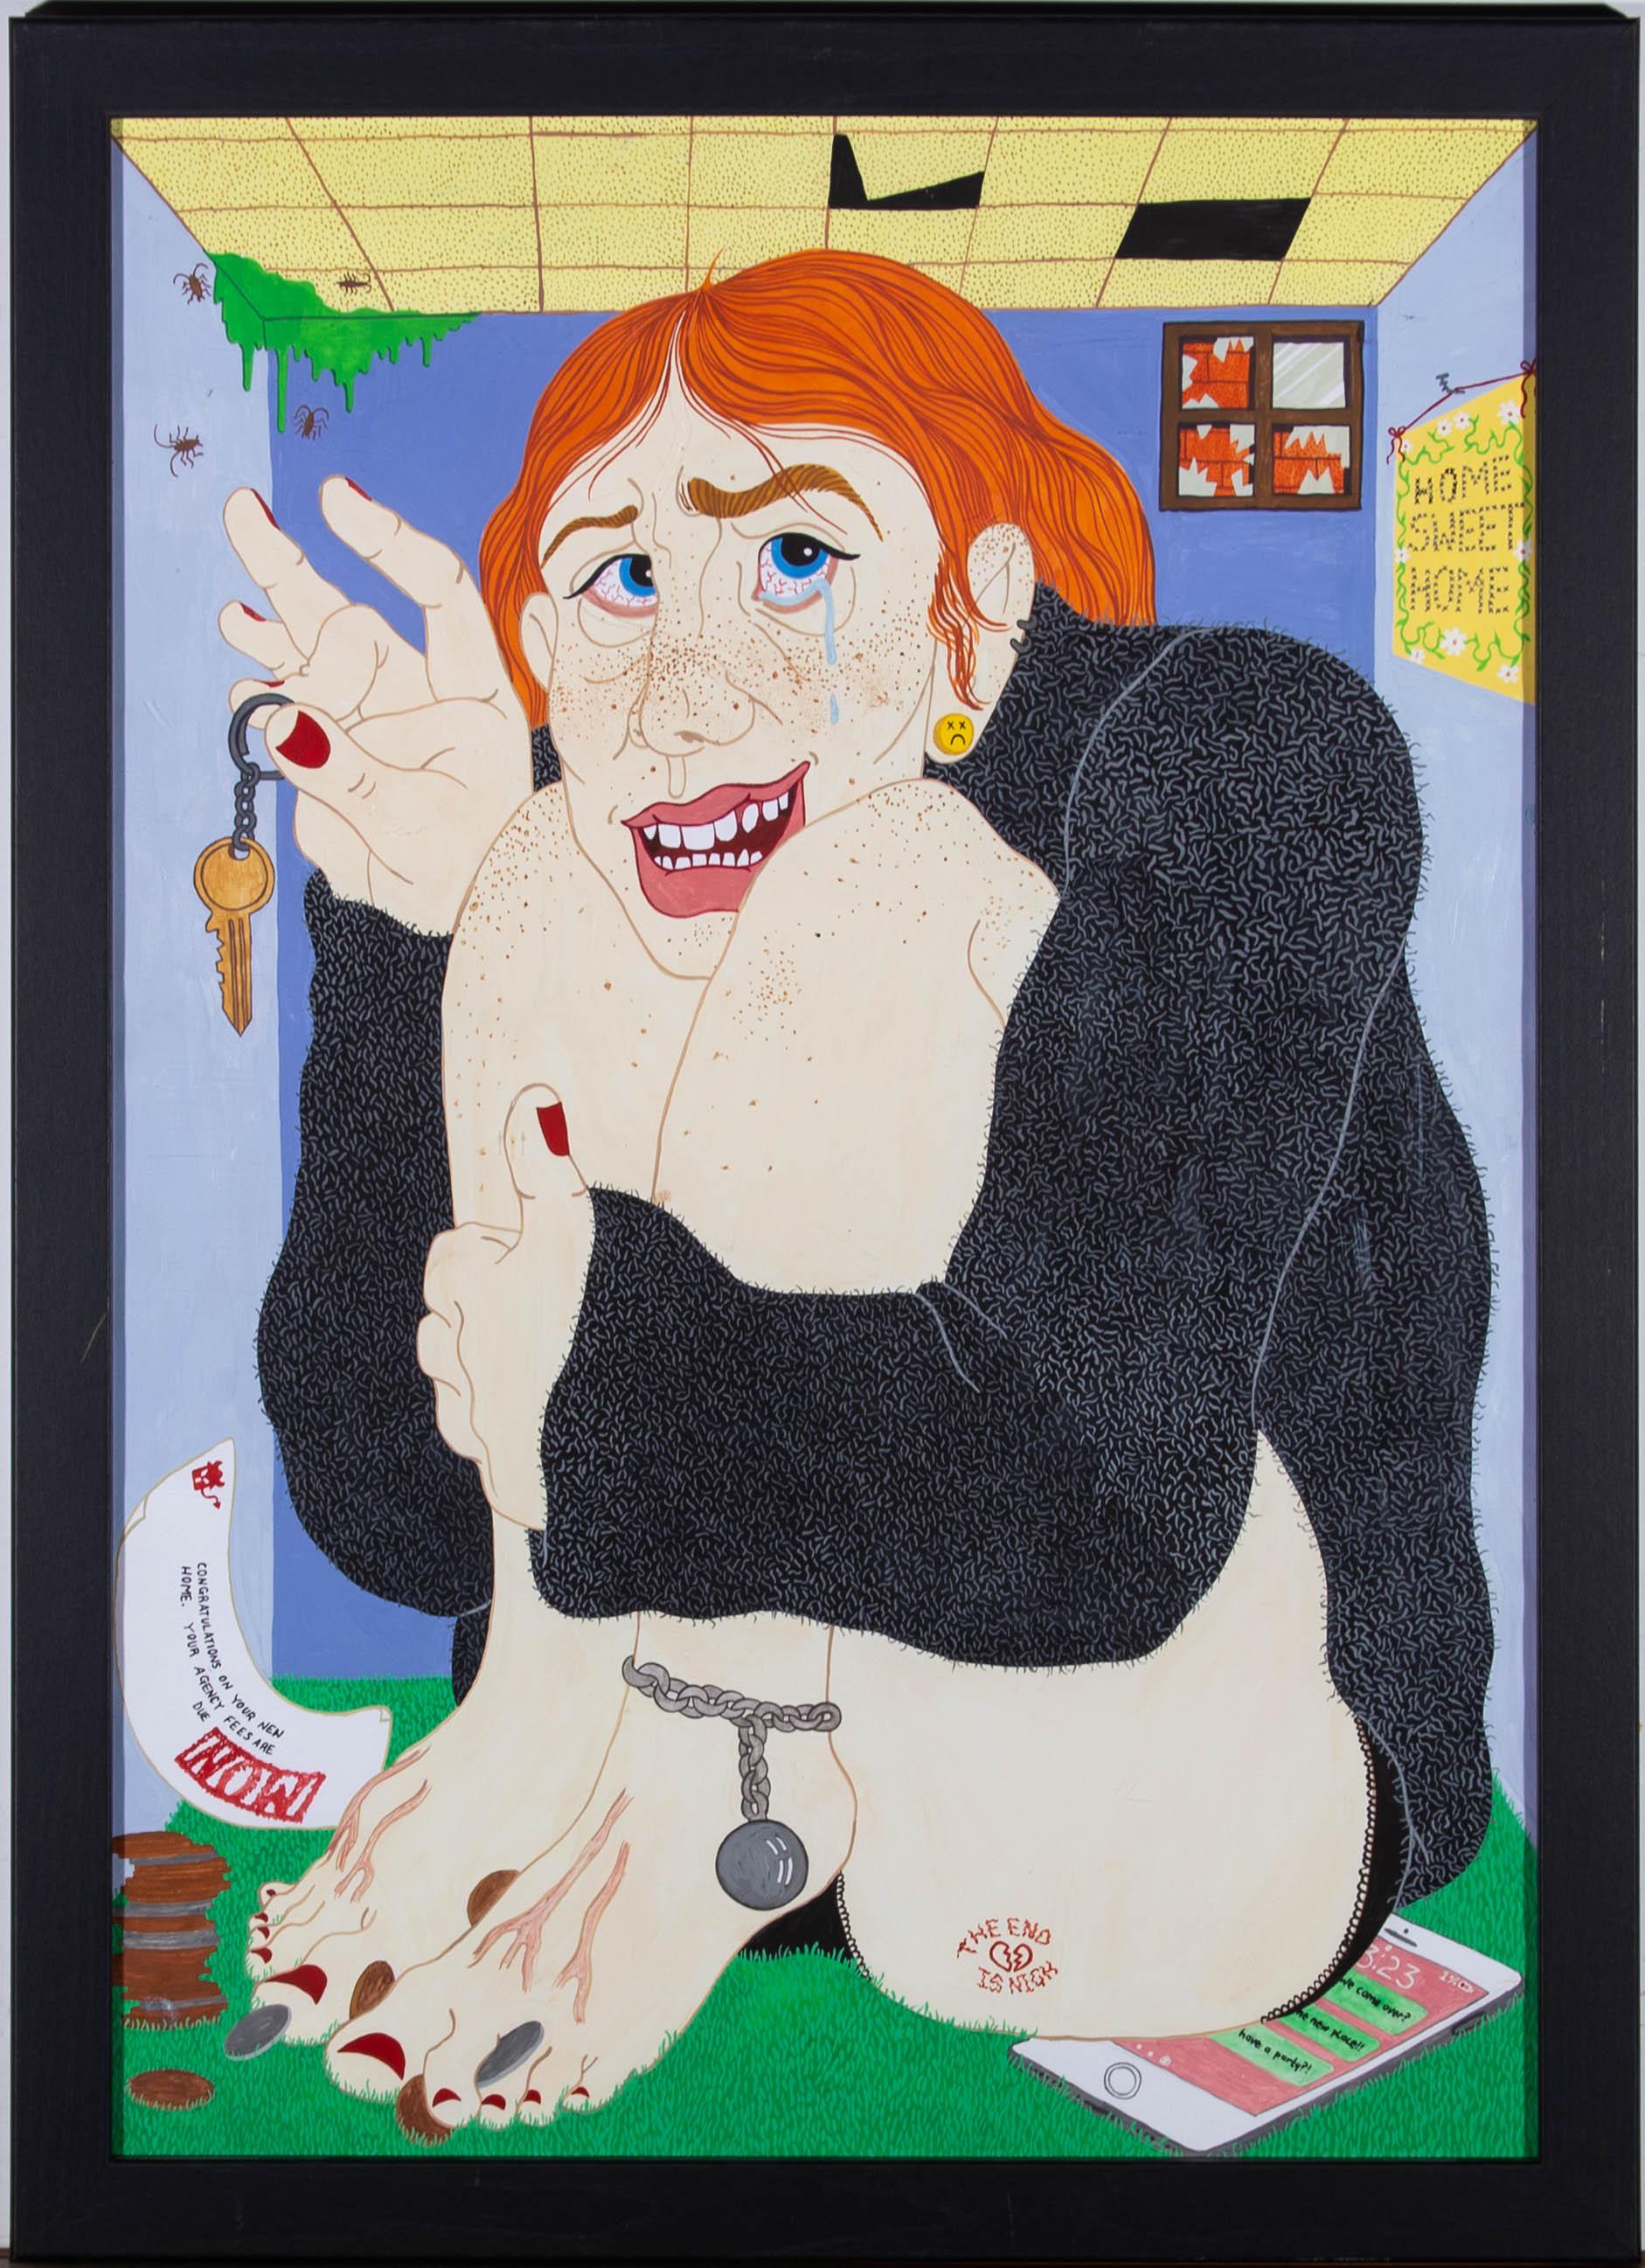 An incredibly vibrant and eye catching painting in gouache showing a young woman, hunched on the floor of her new home. The painting throws a humorous spin on the realities of a new home in the treacherous property market. She smiles a joyless smile